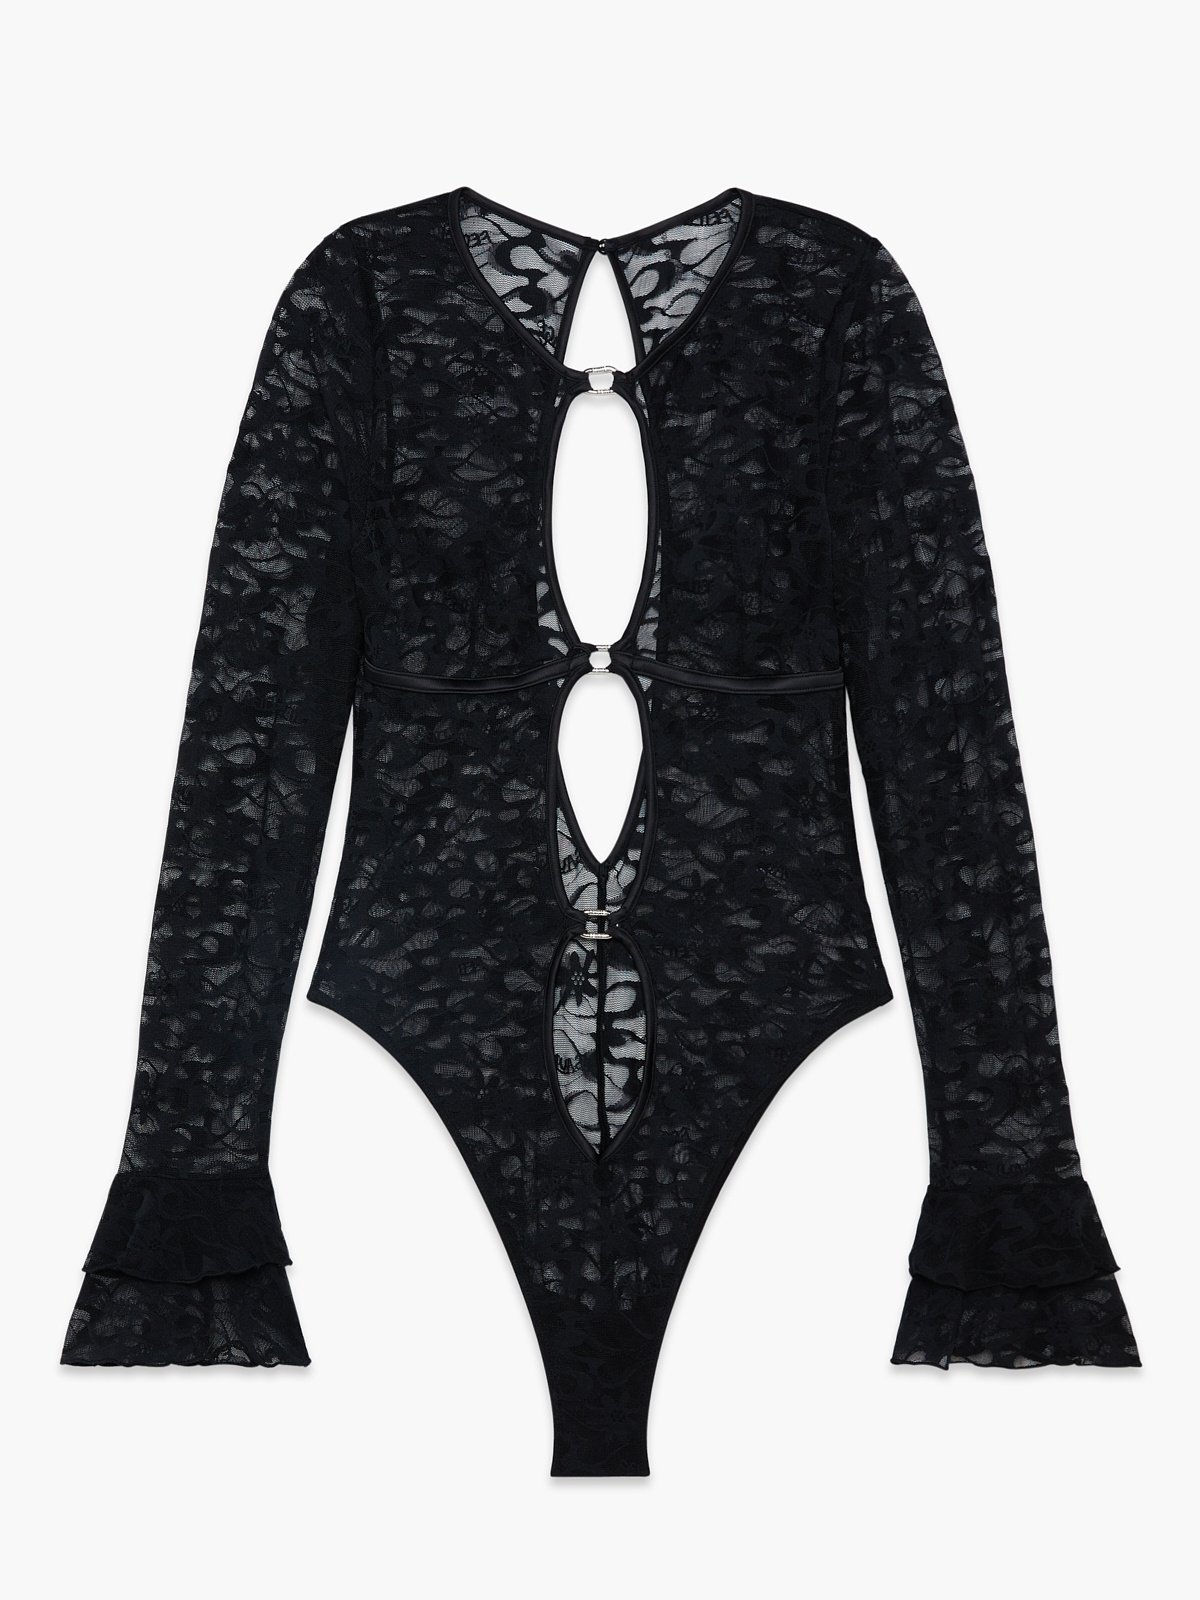 Long-Sleeve Link Up Lace Teddy